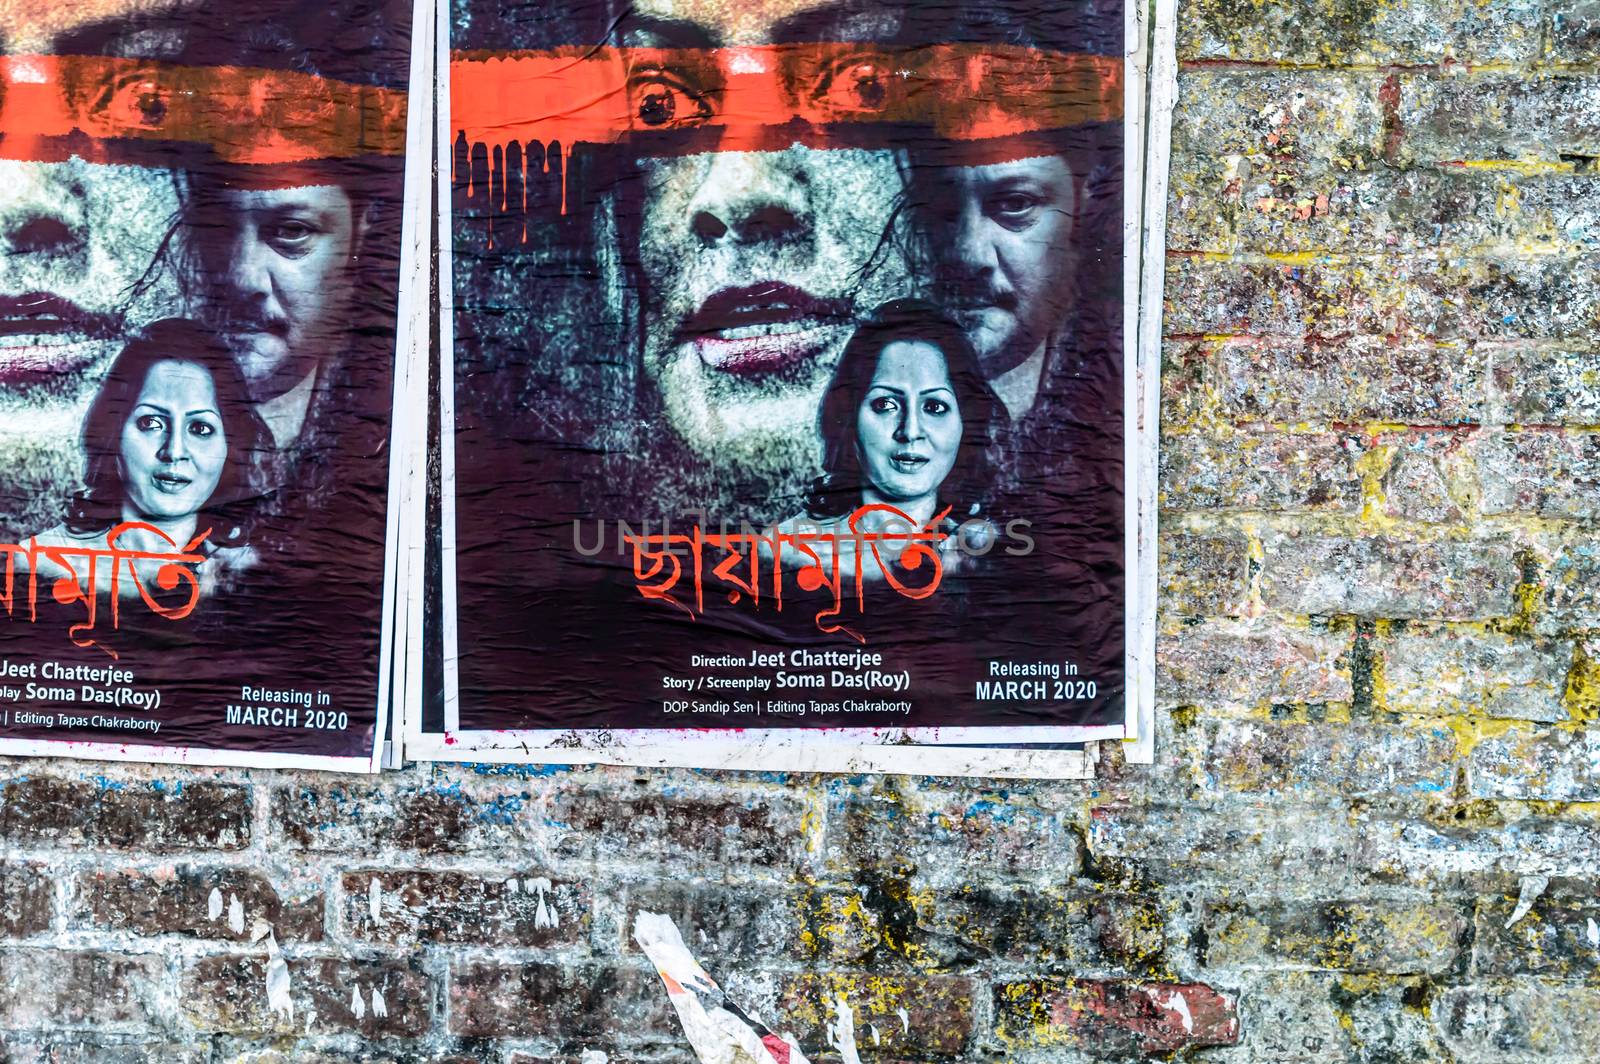 Bengali Tollywood Indian movie posters on an old brick wall of city street. Tollygunge Kolkata West Bengal India South Asia Pacific March 2020